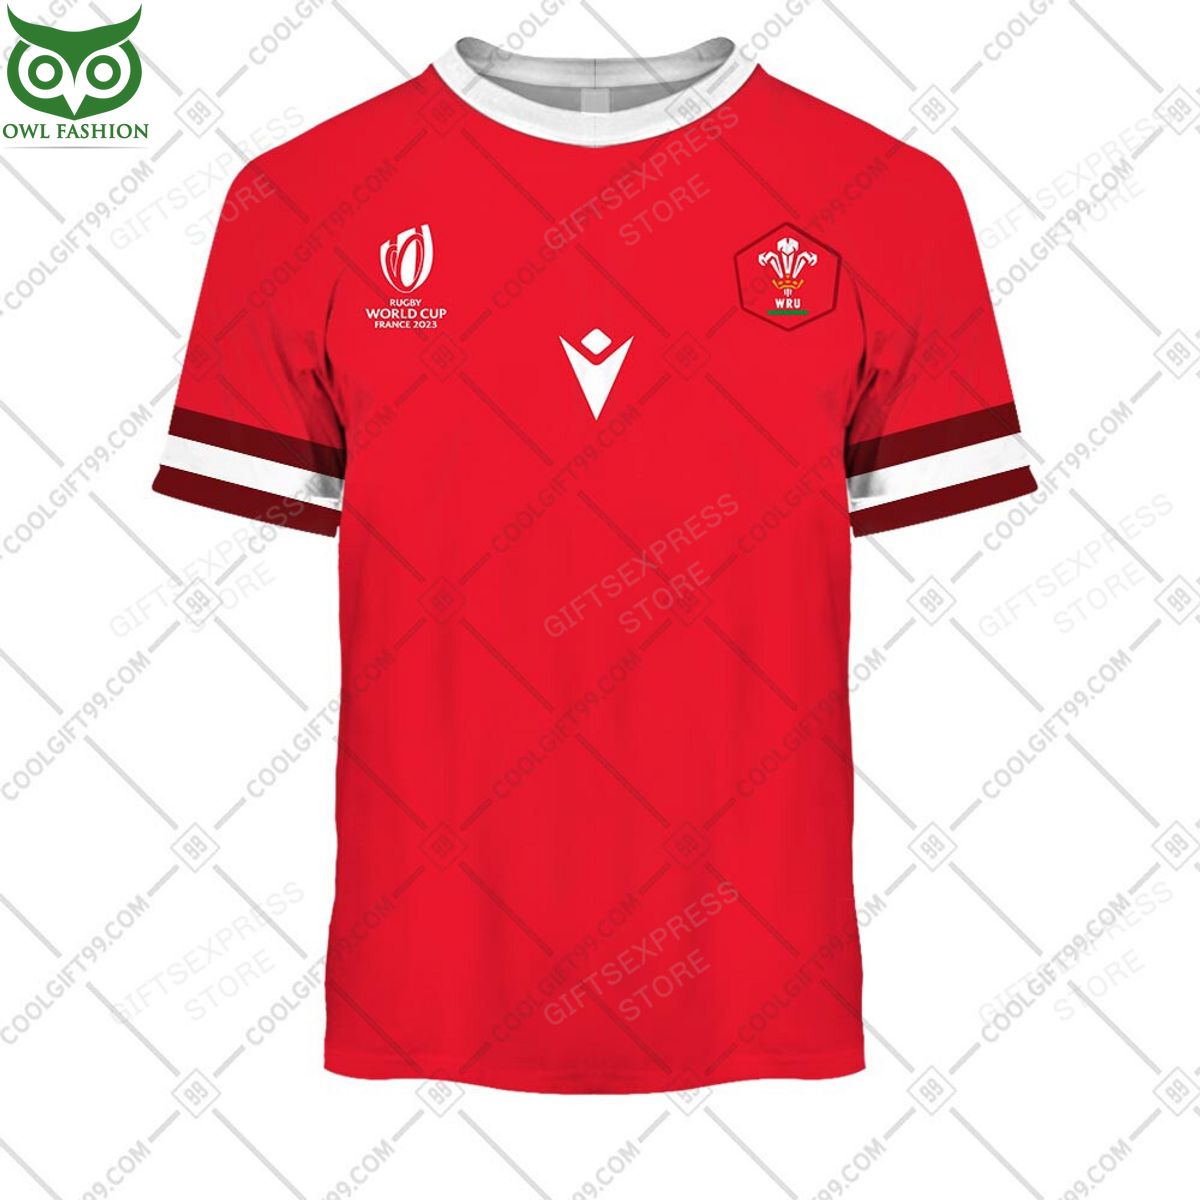 rugby world cup wales home jersey personalized 3d hoodie tshirt 6 nBk2R.jpg